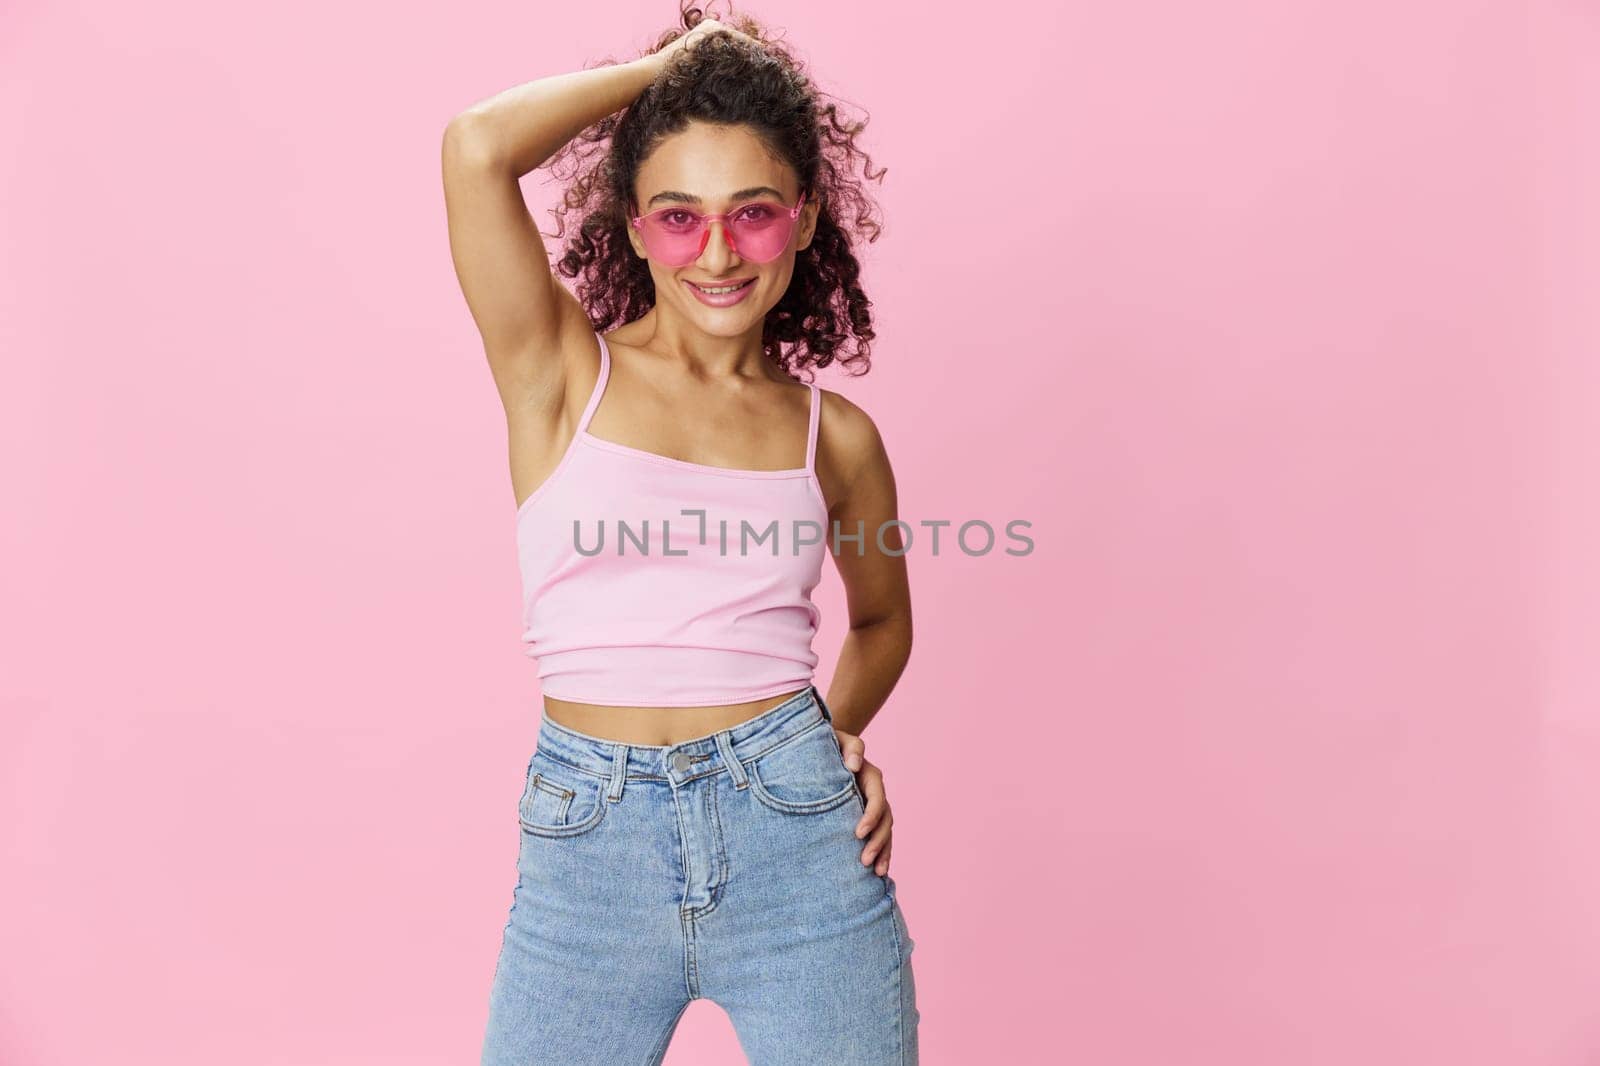 Happy woman hands up waxing her armpits, shaving, with curly hair in a pink tank top and jeans on a pink background wearing sunglasses with a nice tan, copy space. High quality photo